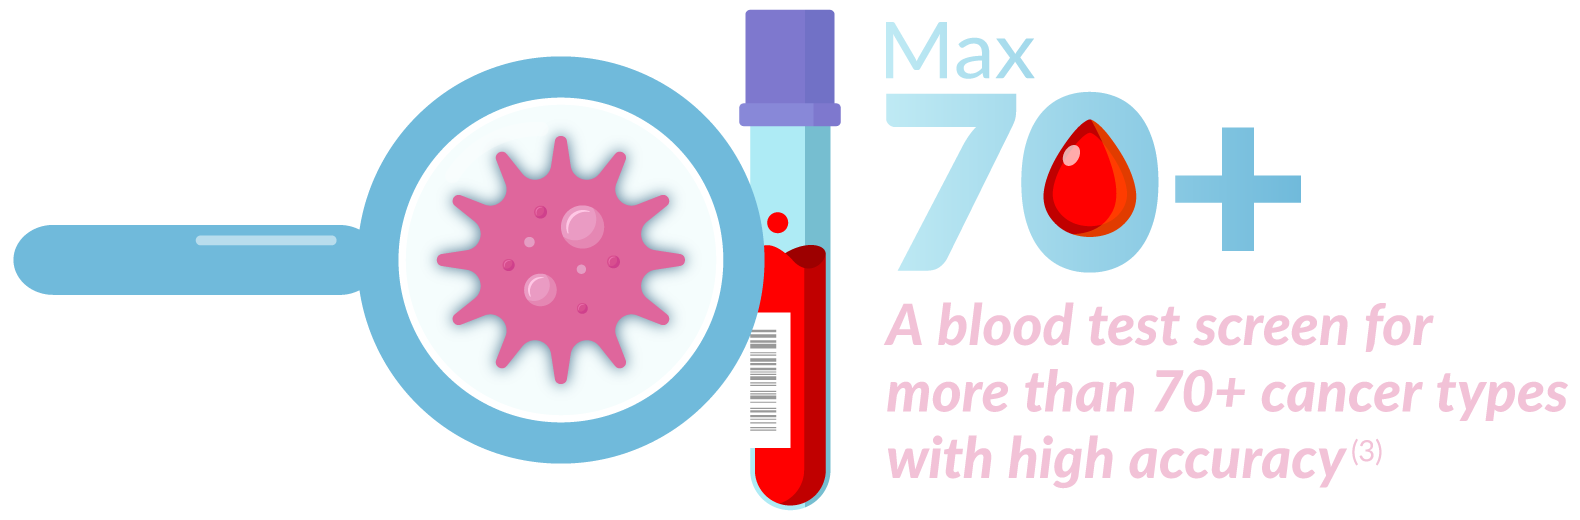 Max 70+ A blood test screen for more than 70+ cancer types with high accuracy(3)